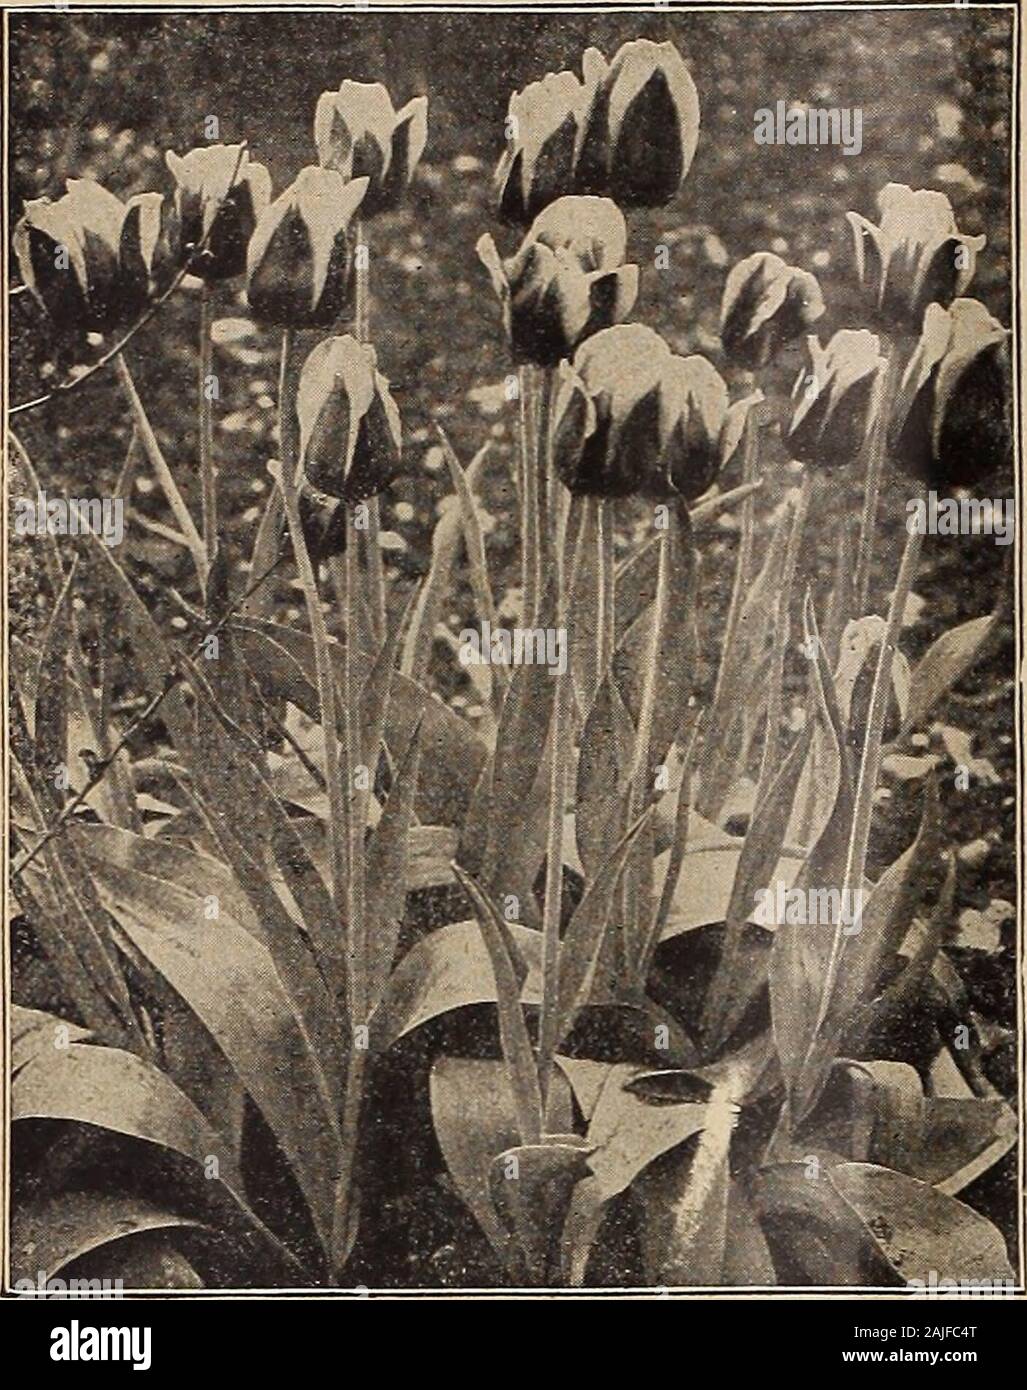 Dreer's autumn catalogue 1918 . 1IENI!lfADREER-PHIlADElPHIA4;4mBUbBSF0R1AbLJ&gt;liANTINH[. Single Early Tulips, Ki5er Kroon (offered on page 7). C0I.I.ECTI01VS OF SIISGI^BEARI.Y TULIPS A border planted with one of the following collections formsone of the most interesting and educational features of the garden,and is the very best way to become familiar with the various va-rieties, their colors, heights, time of blooming, etc., so you canchoose your own sorts when planting a bed or border. 3 each of 20 varieties, 60 bulbs $2 25 6 20 120 4 00 12 20 240 7 50 25 20 500 14 00 DREERS SUPERB MIXTUR Stock Photo